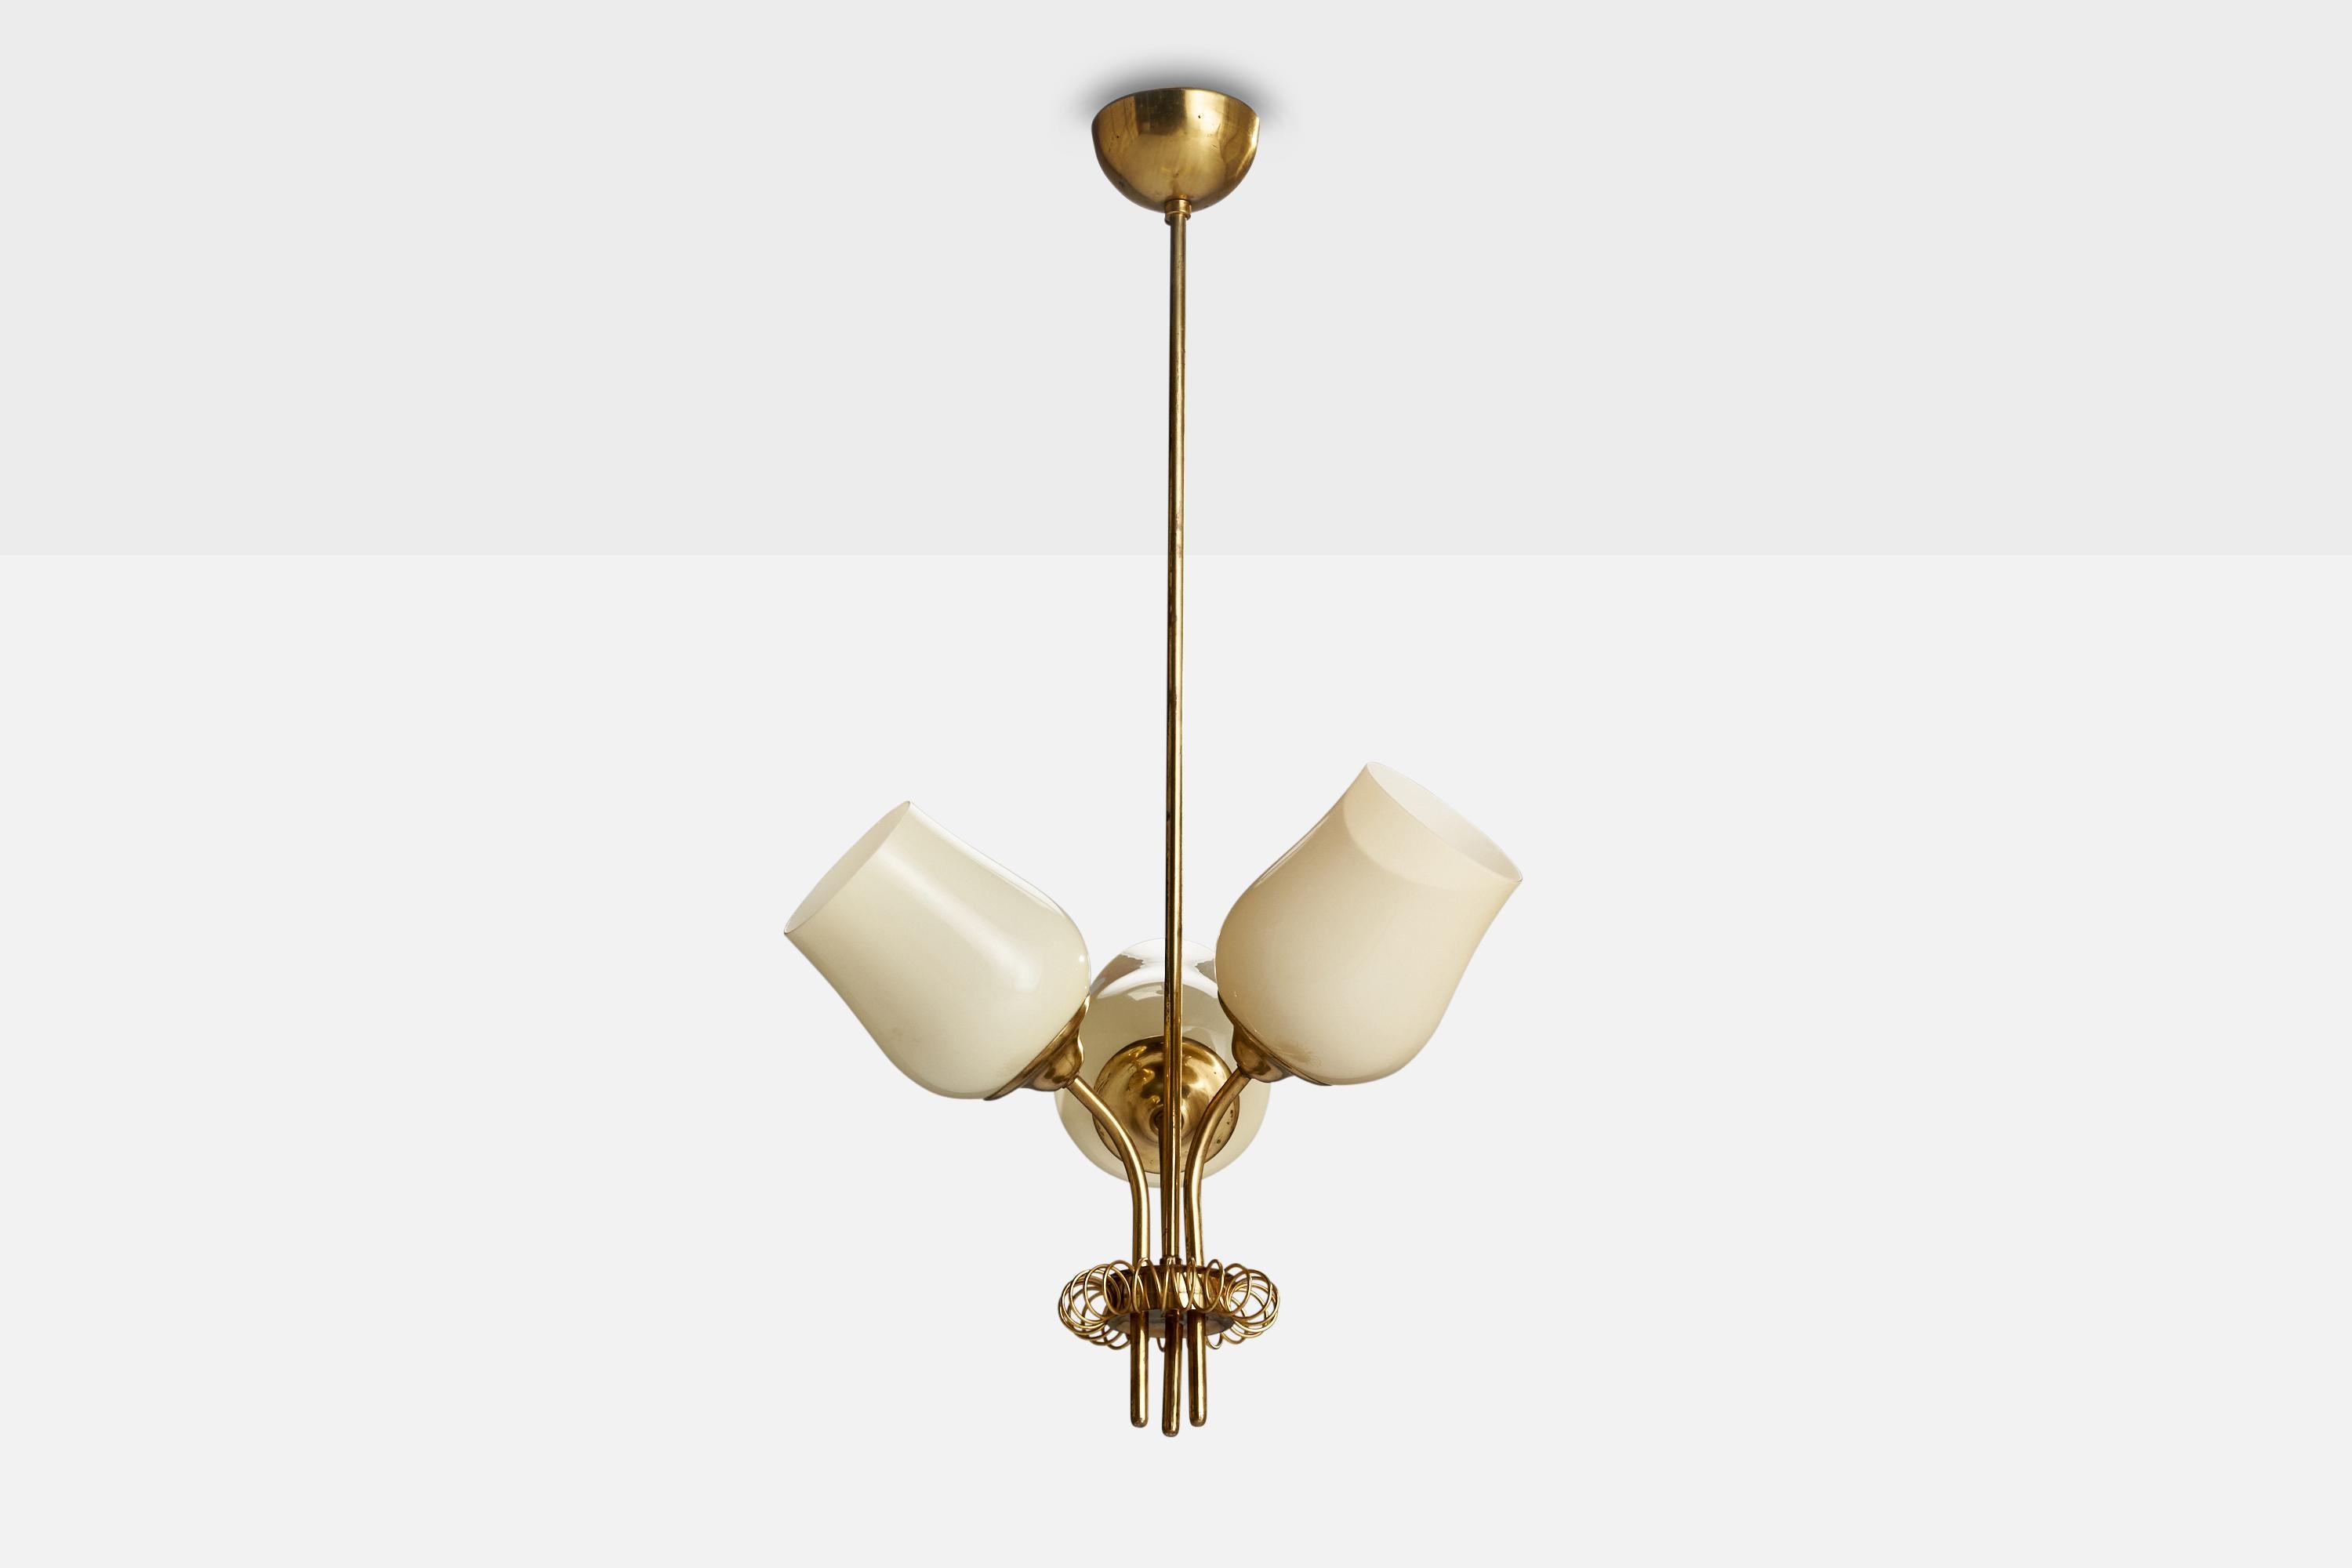 A brass and opaline glass chandelier designed and produced by ITSU Oy, Finland, c. 1940s.

Dimensions of canopy (inches): 2.5” H x 3.75” Diameter
Socket takes standard E-26 bulbs. 3 socket.There is no maximum wattage stated on the fixture. All